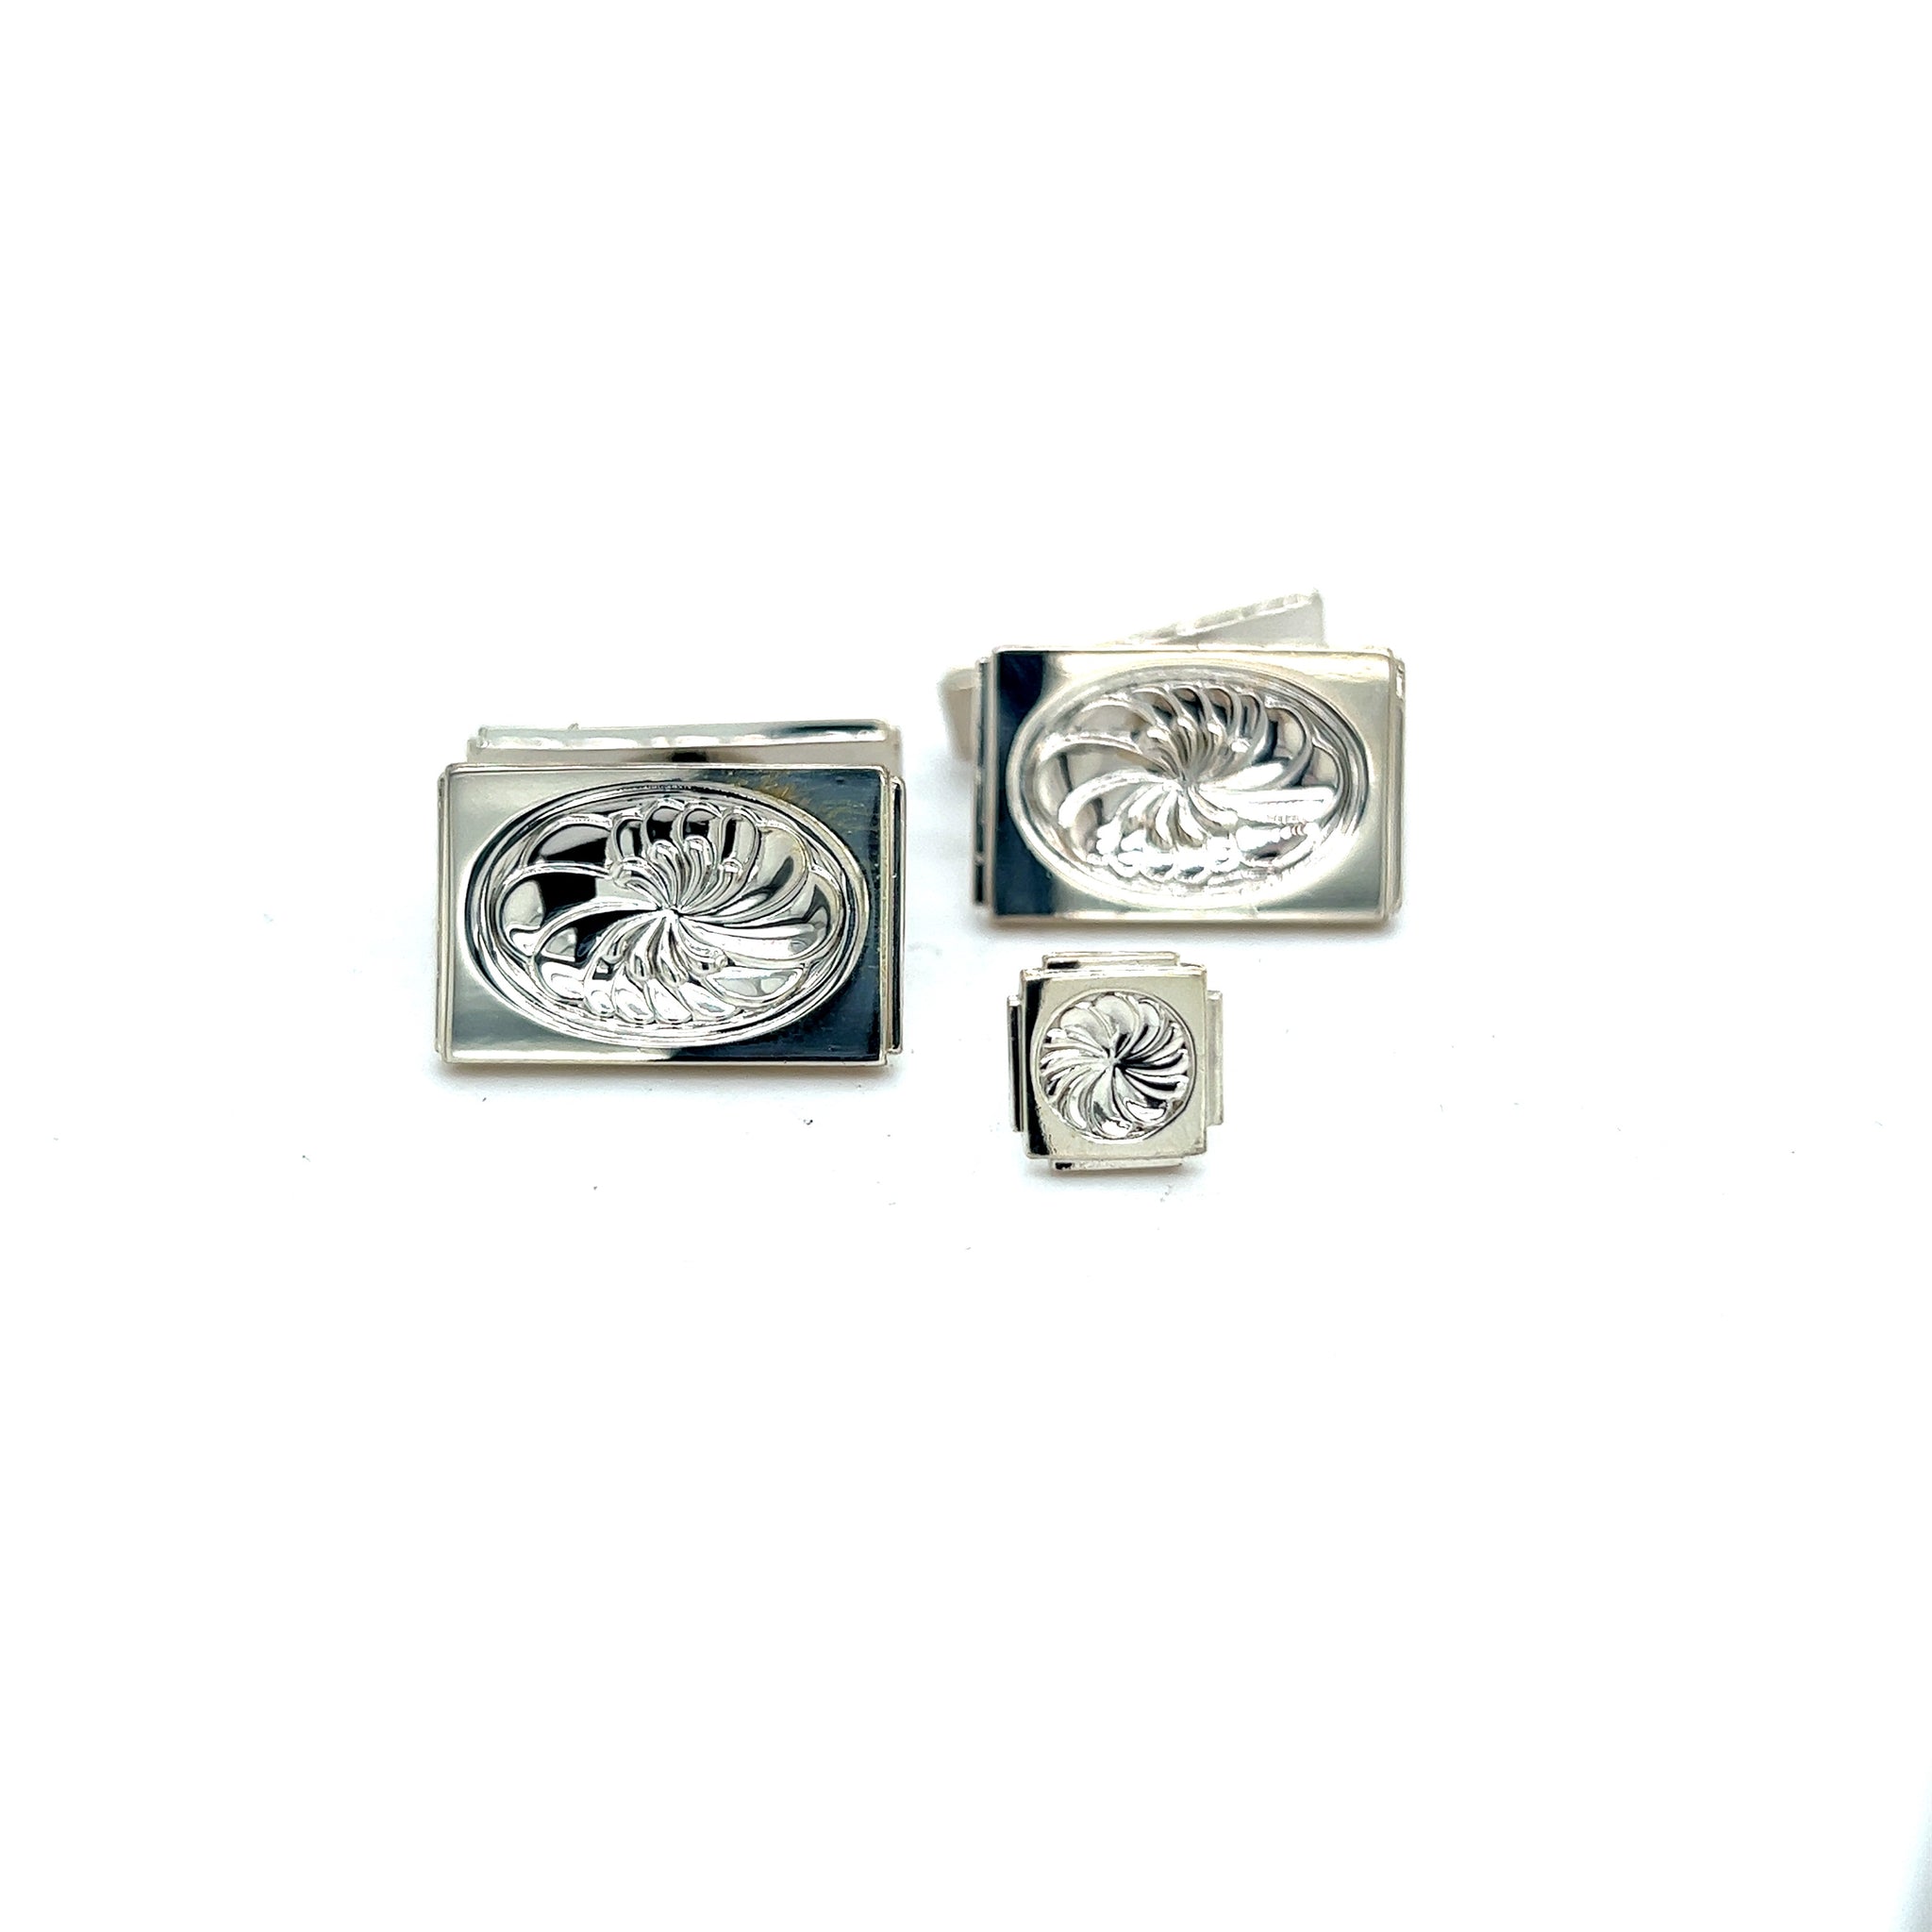 Georg Jensen Estate Mens Cufflinks Set With Tie Pin Without Back of  Tie Pin Silver GJ11